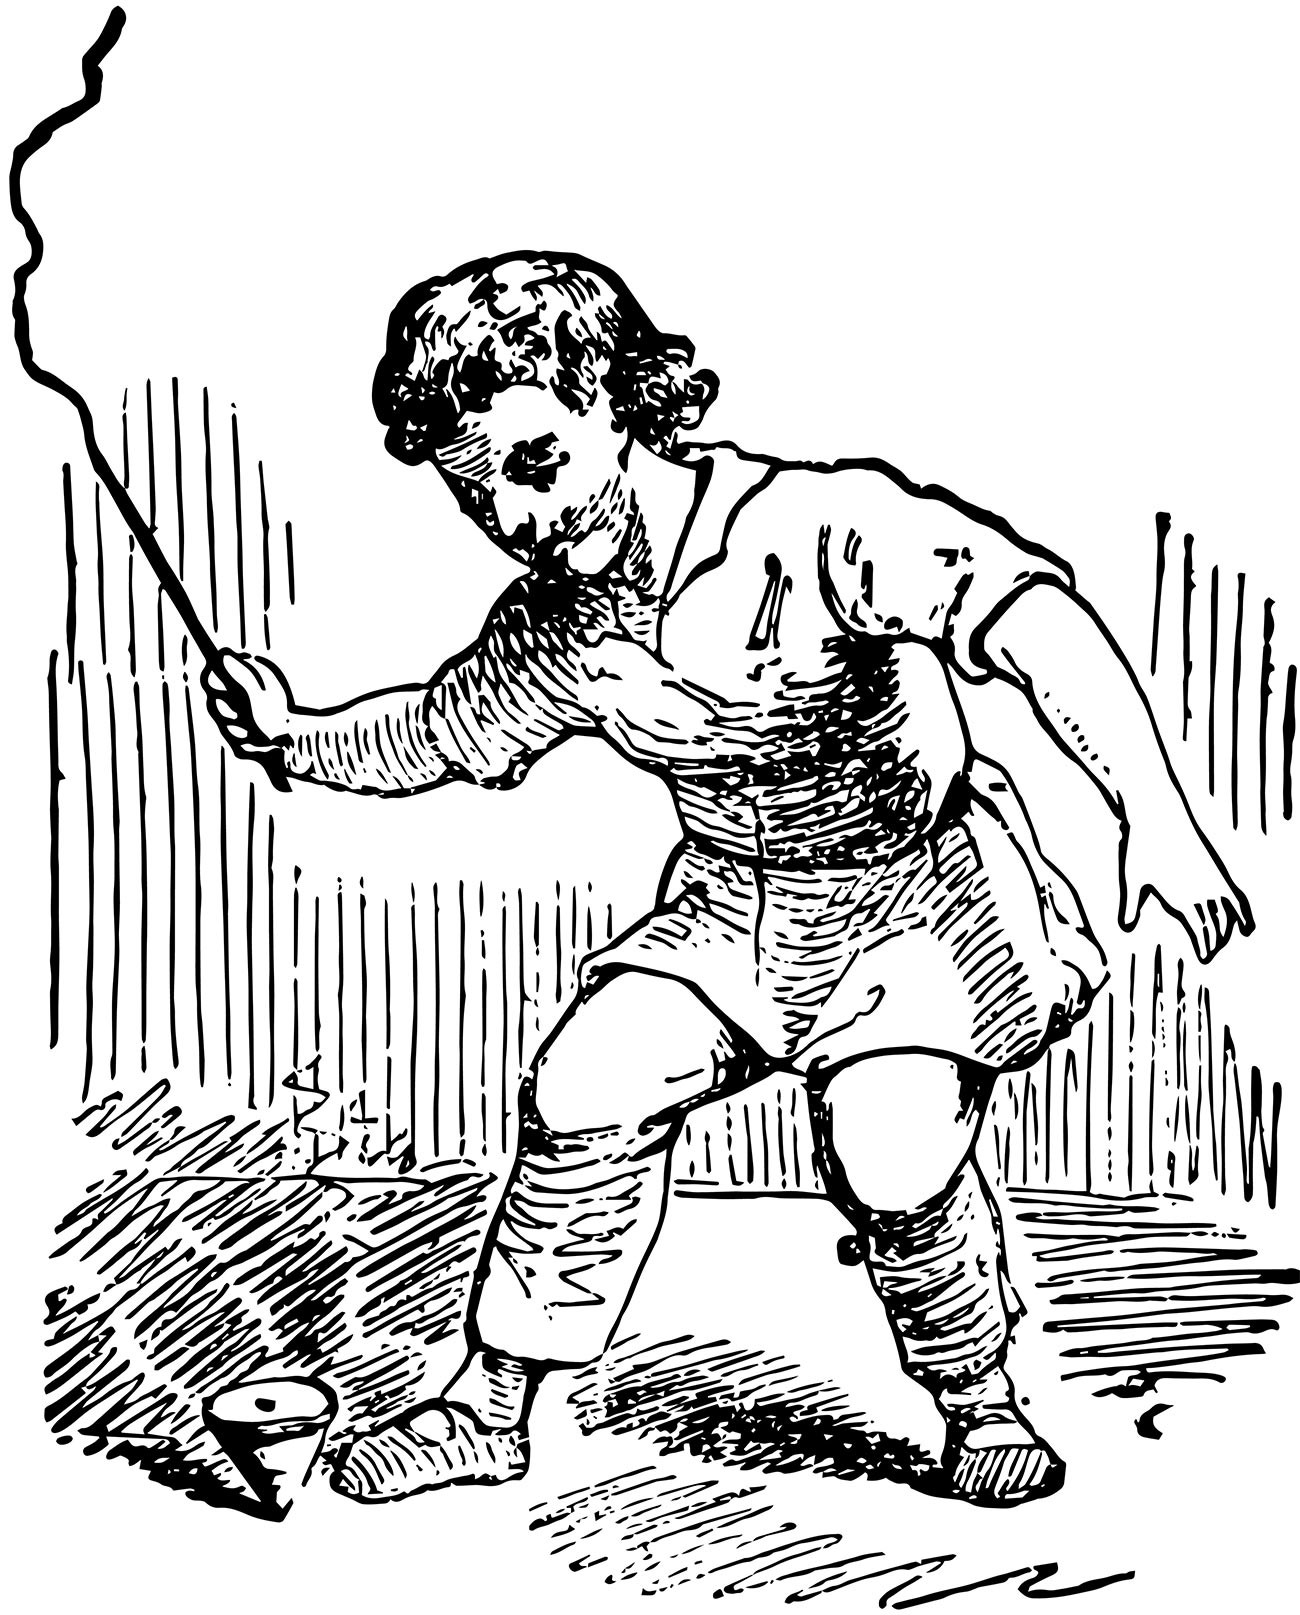 A boy playing a whipping top.